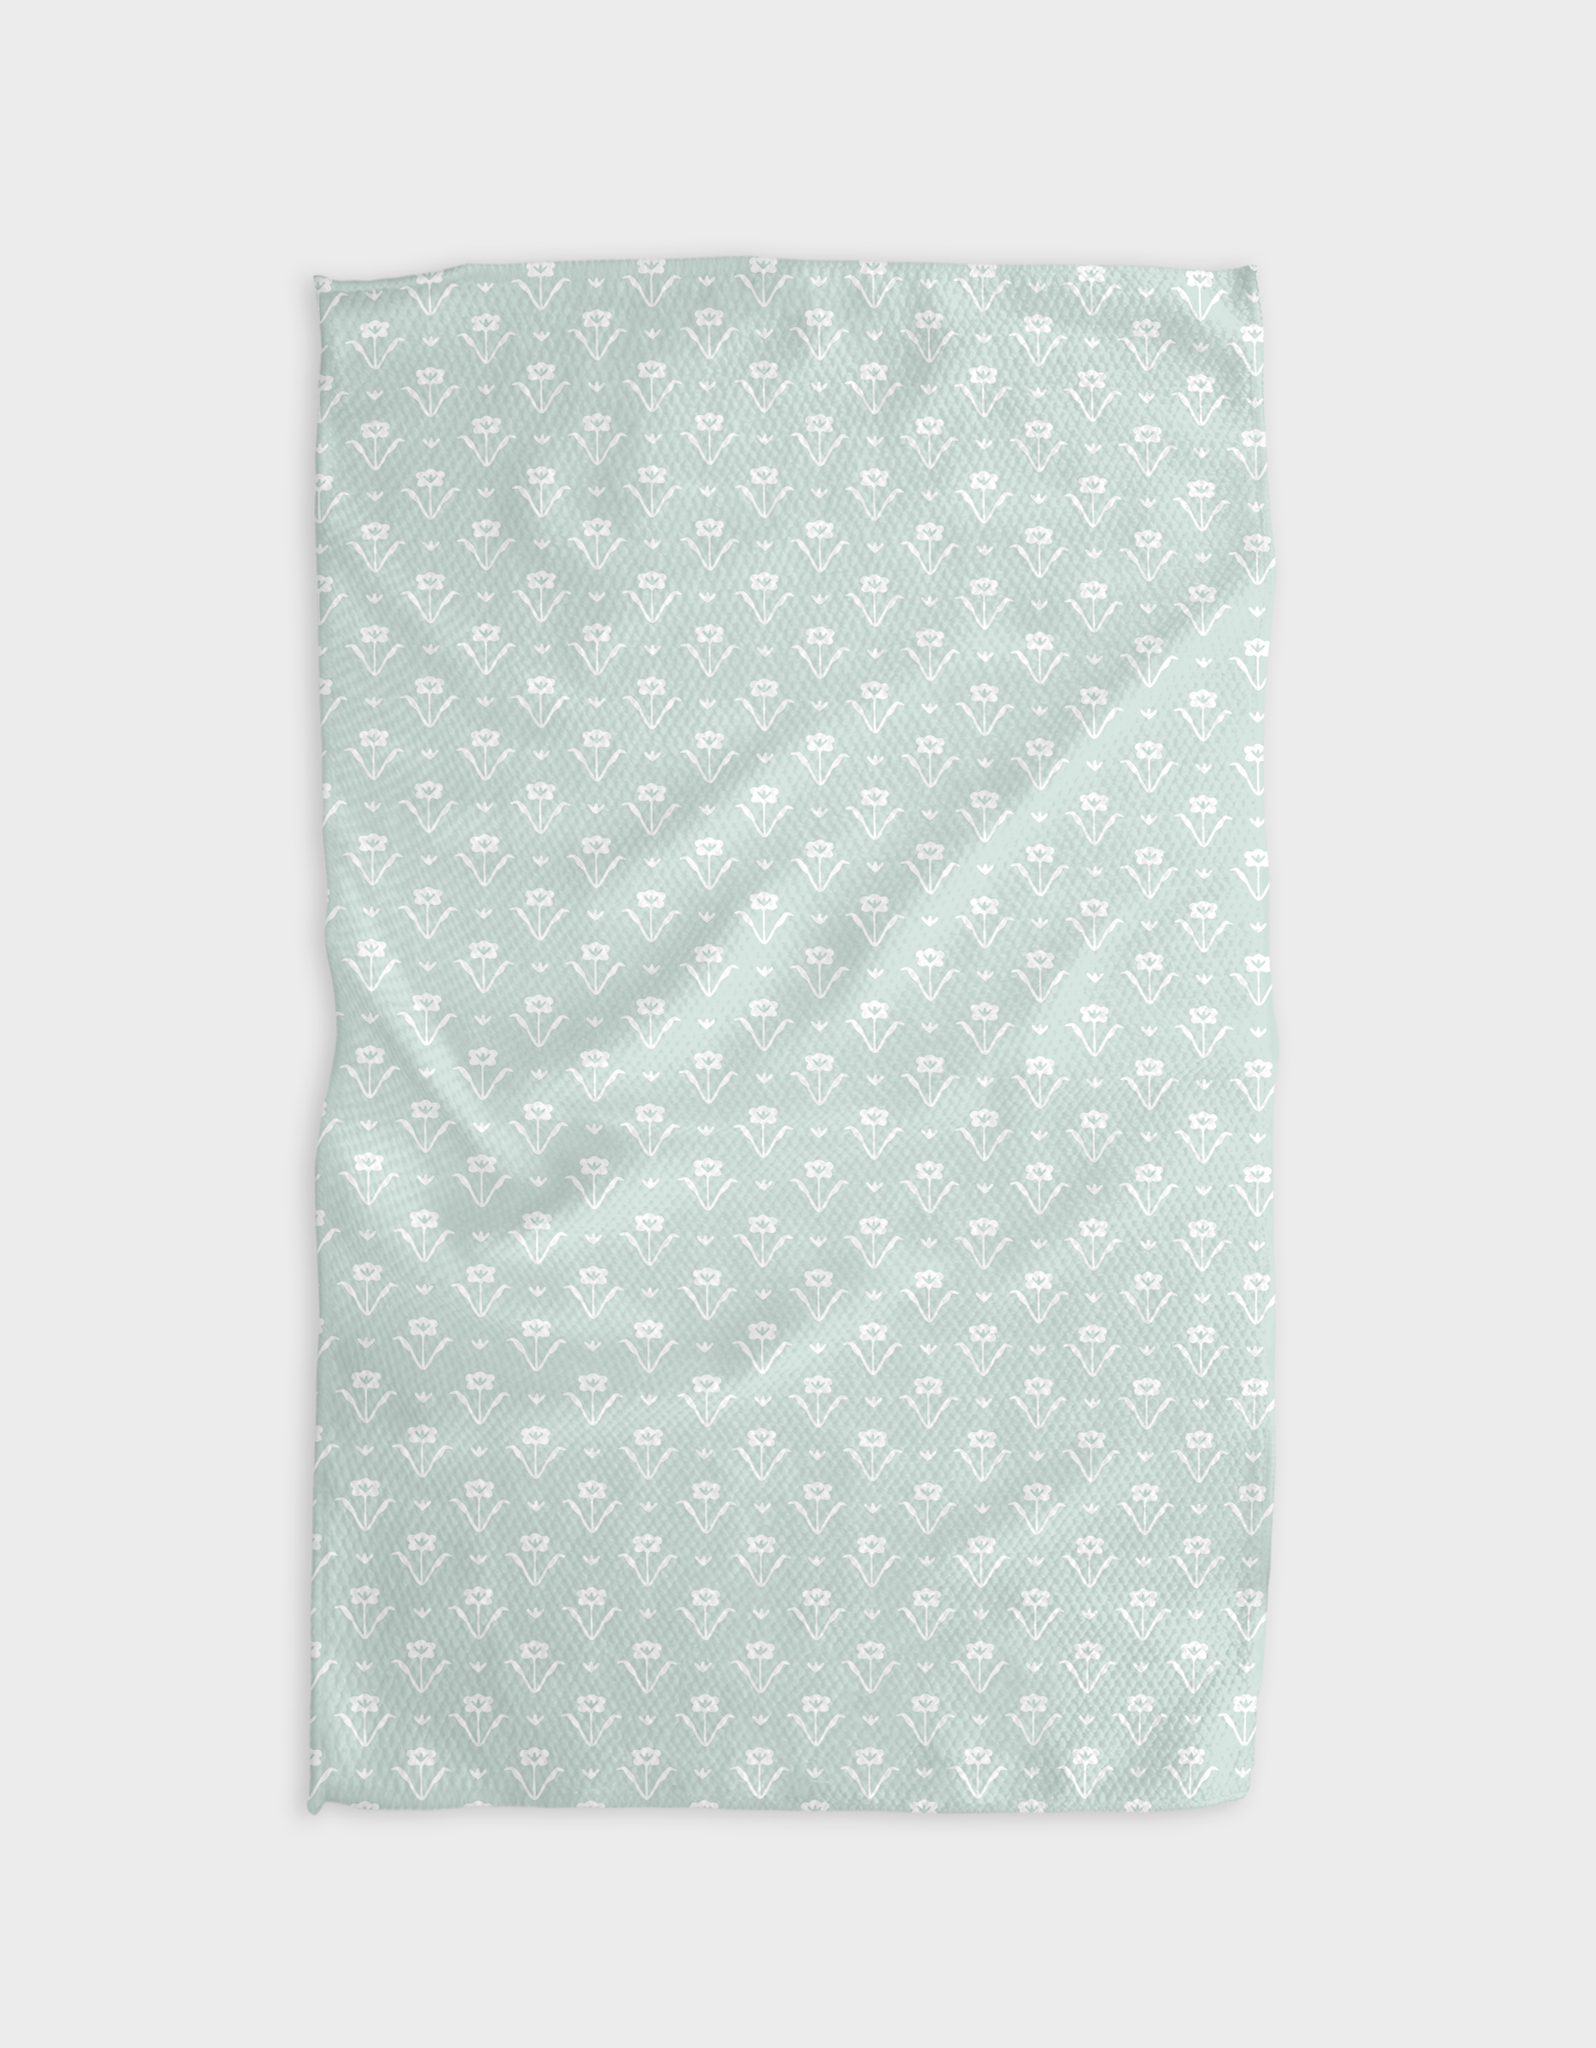 Geometry x The Buy Guide Microfiber Dish Towels, Set of 2 on Food52